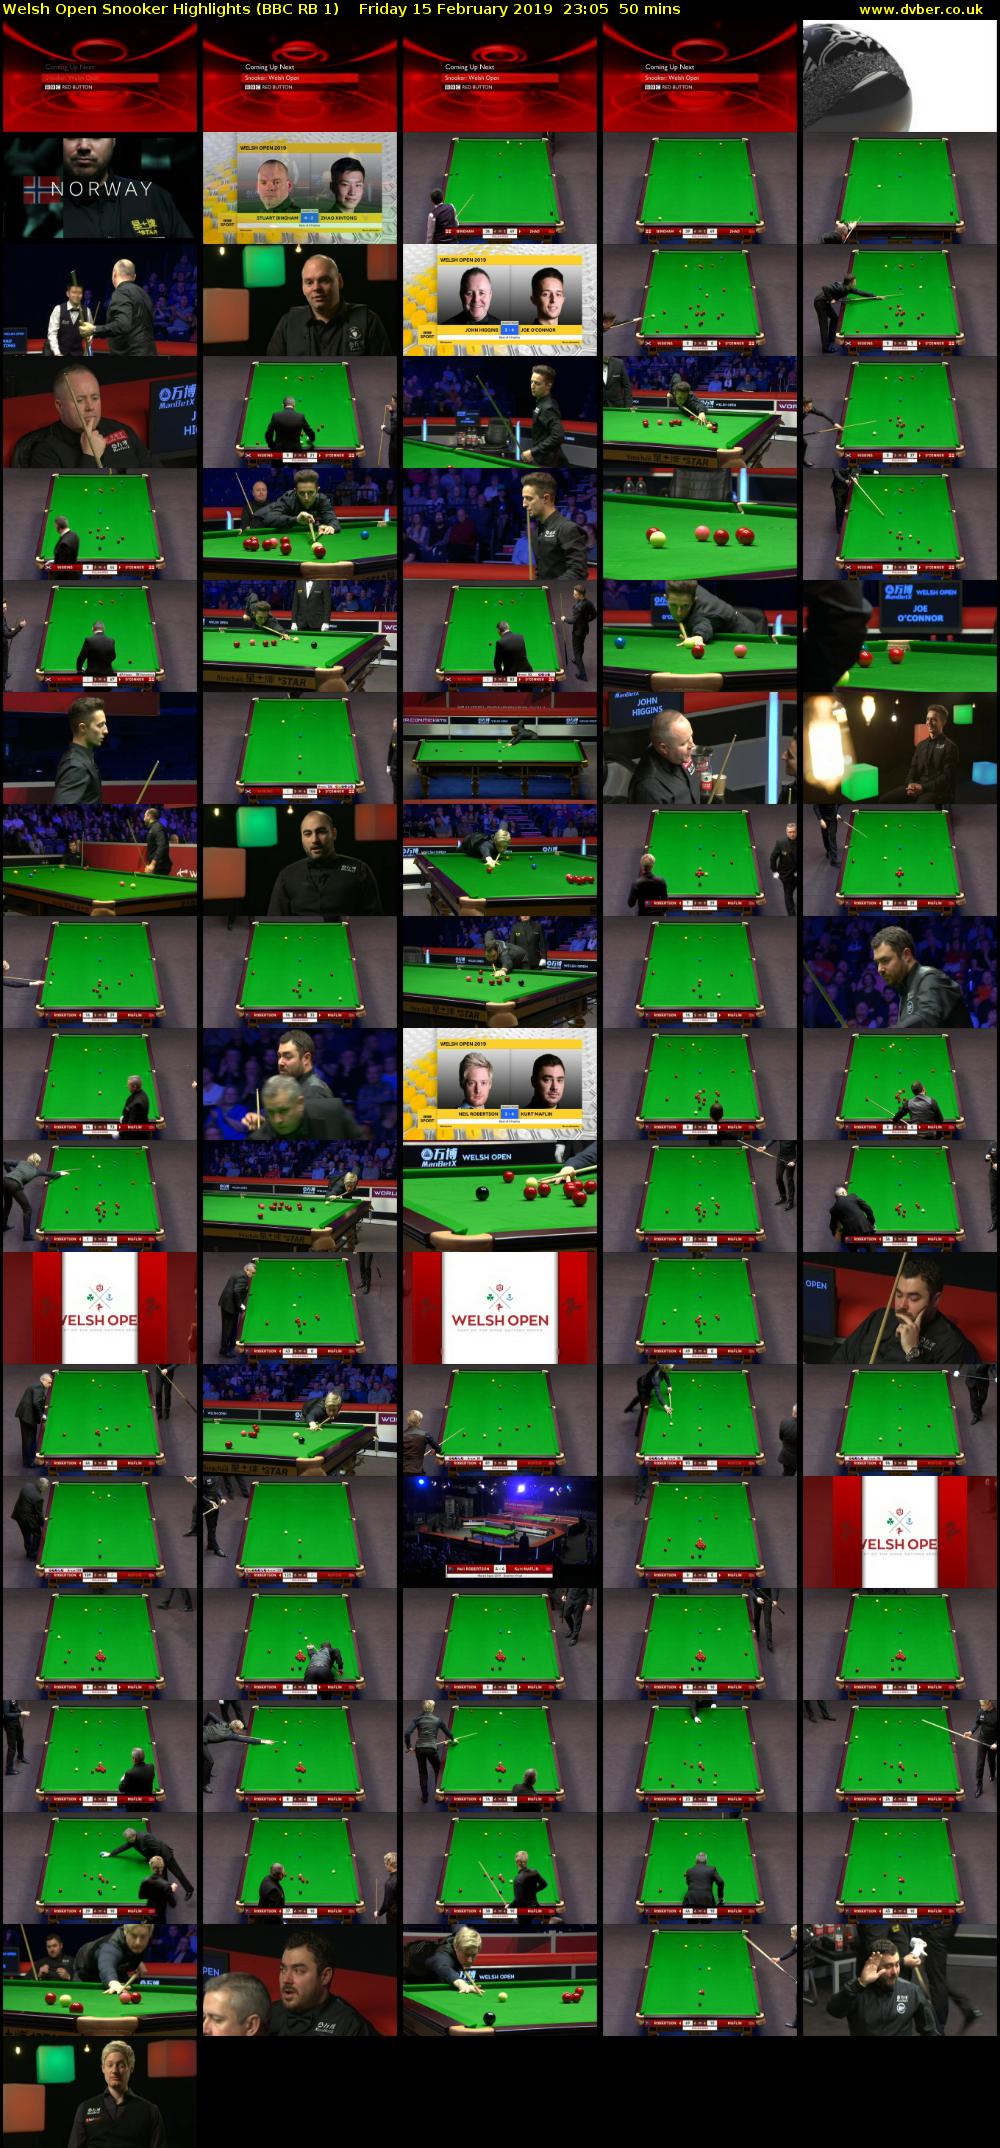 Welsh Open Snooker Highlights (BBC RB 1) Friday 15 February 2019 23:05 - 23:55